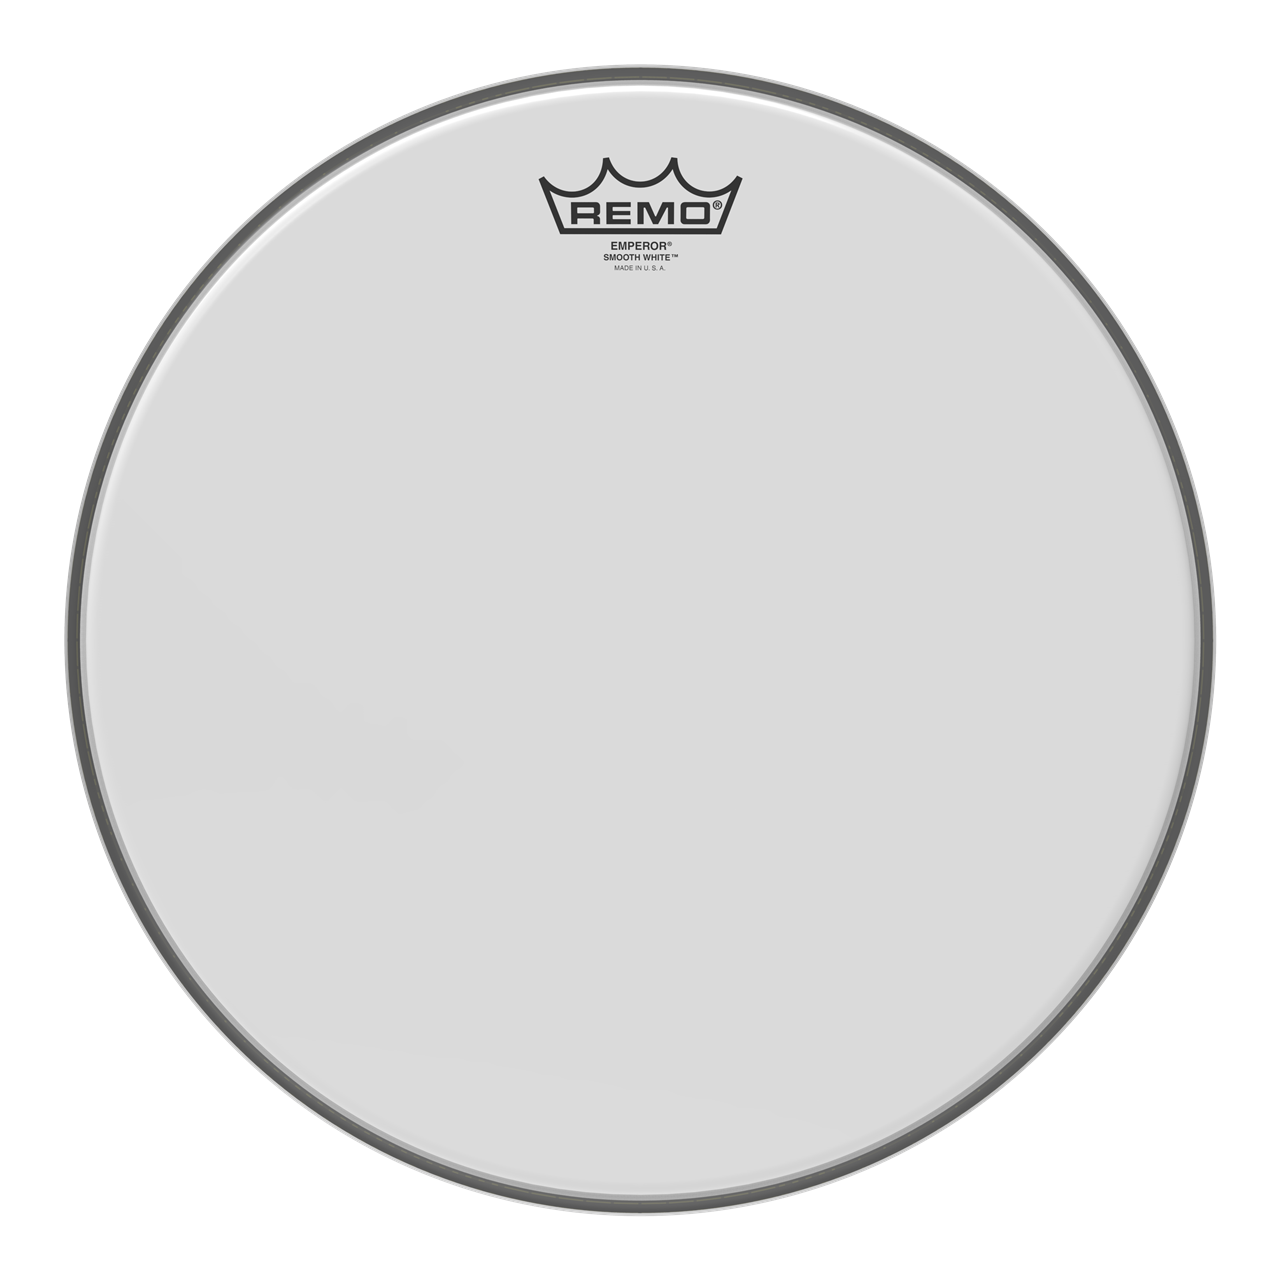 Remo BE-0212-00 Emperor, 12" Smooth White